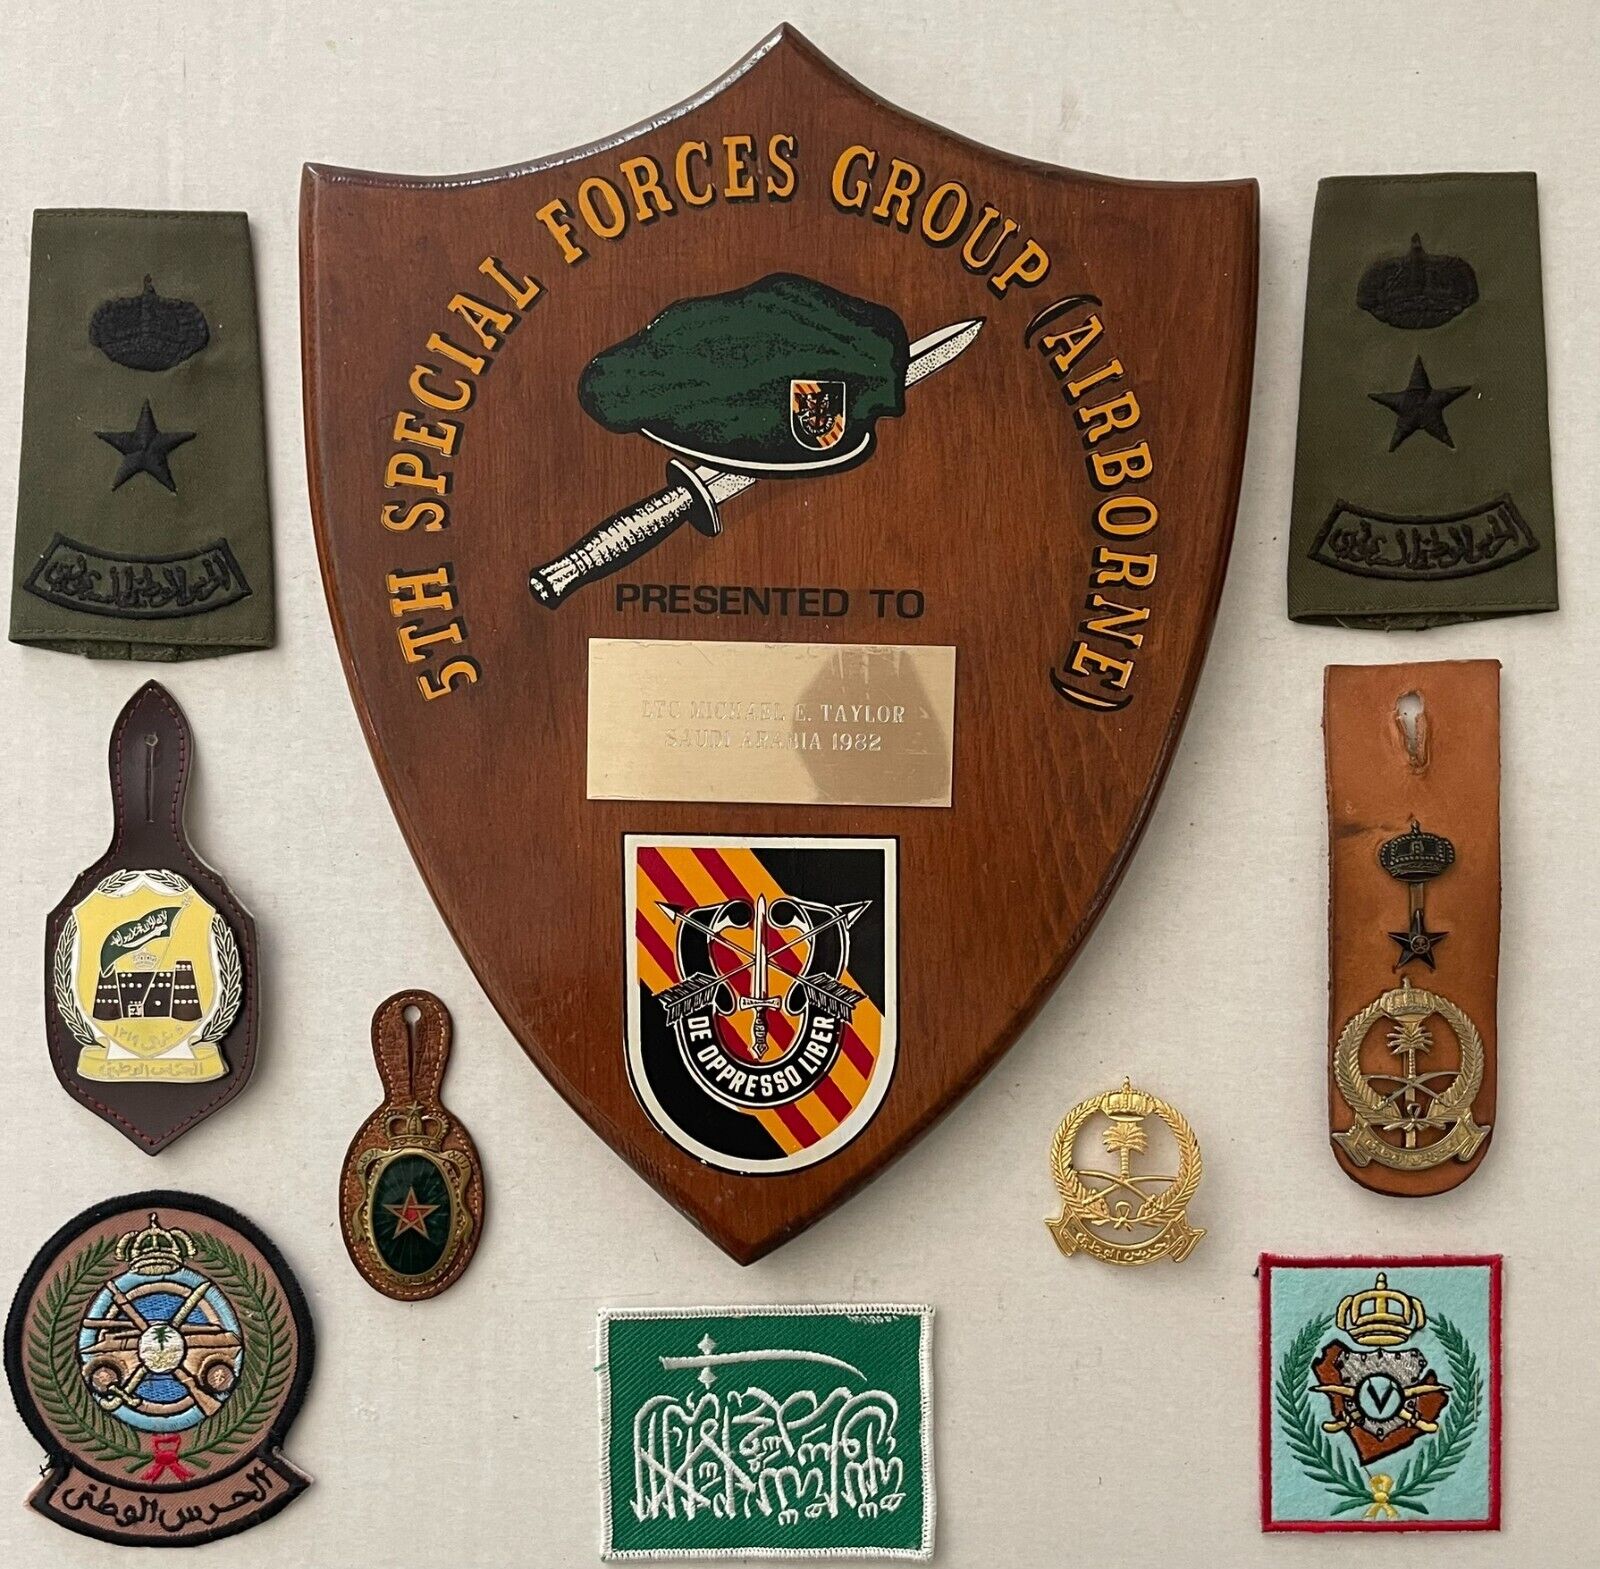 POST WAR 1982 5TH SPECIAL FORCES GROUP (ABN) SAUDI ARABIA GROUPING